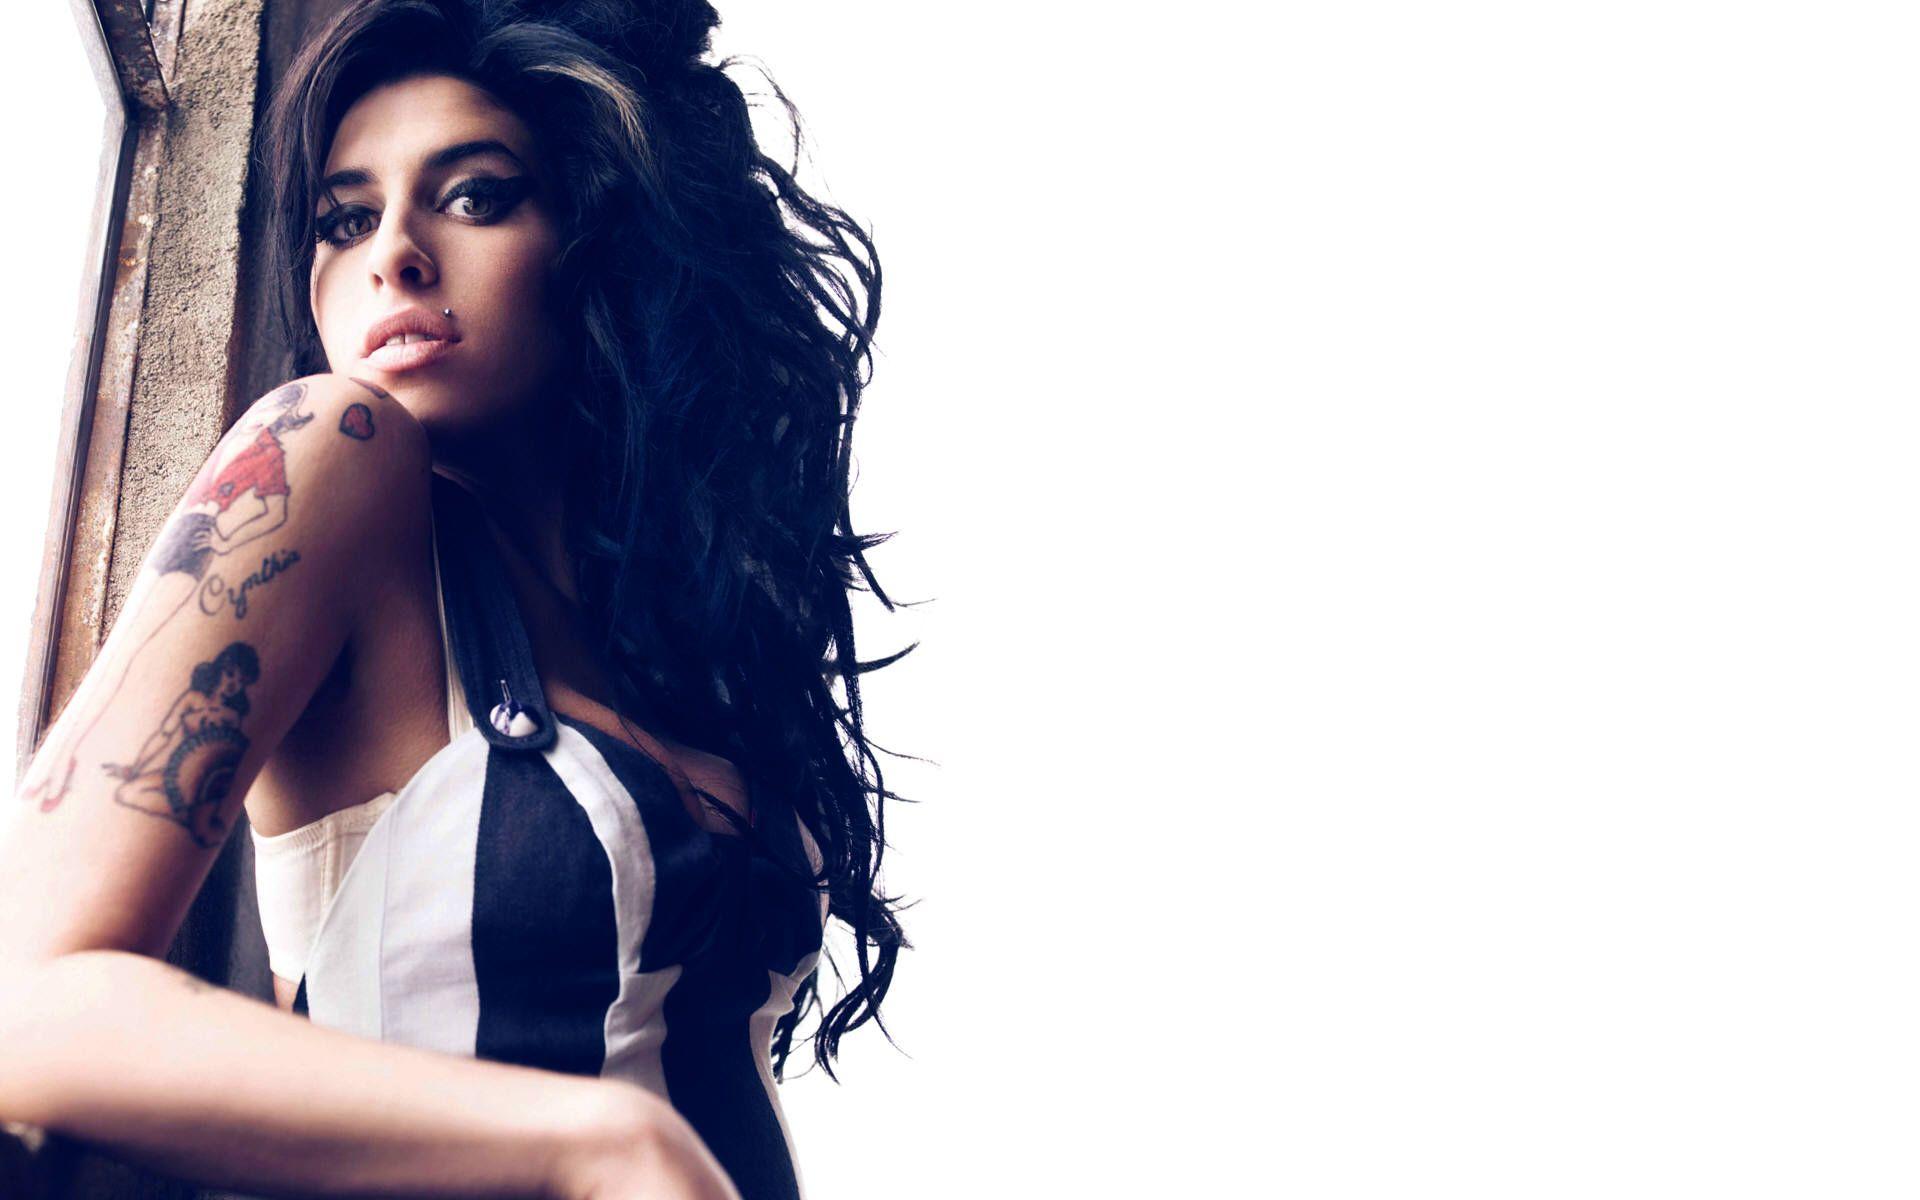 Amy Winehouse Wallpapers High Quality.